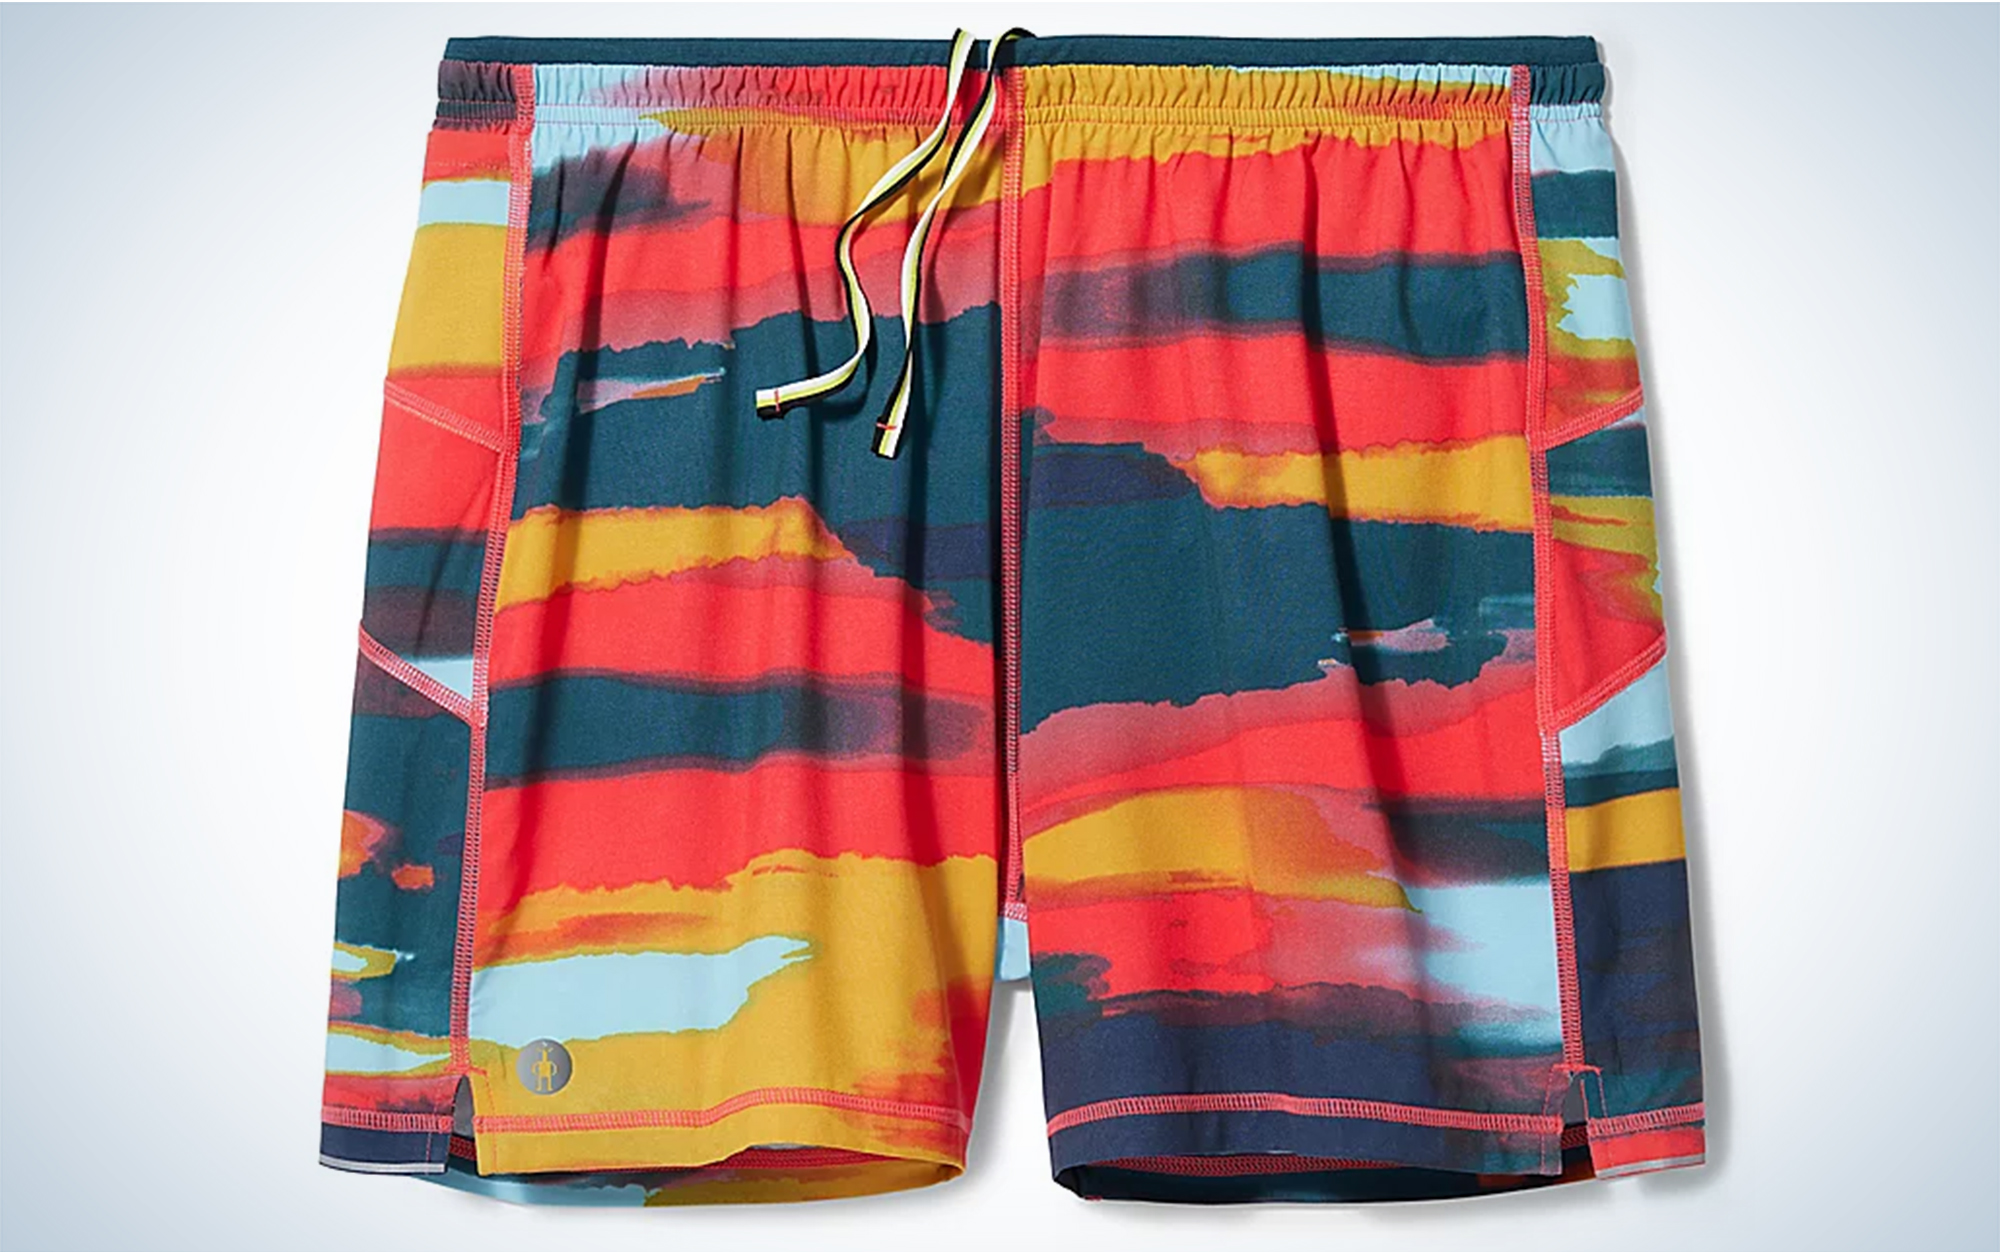 Smartwool Active Lined Short